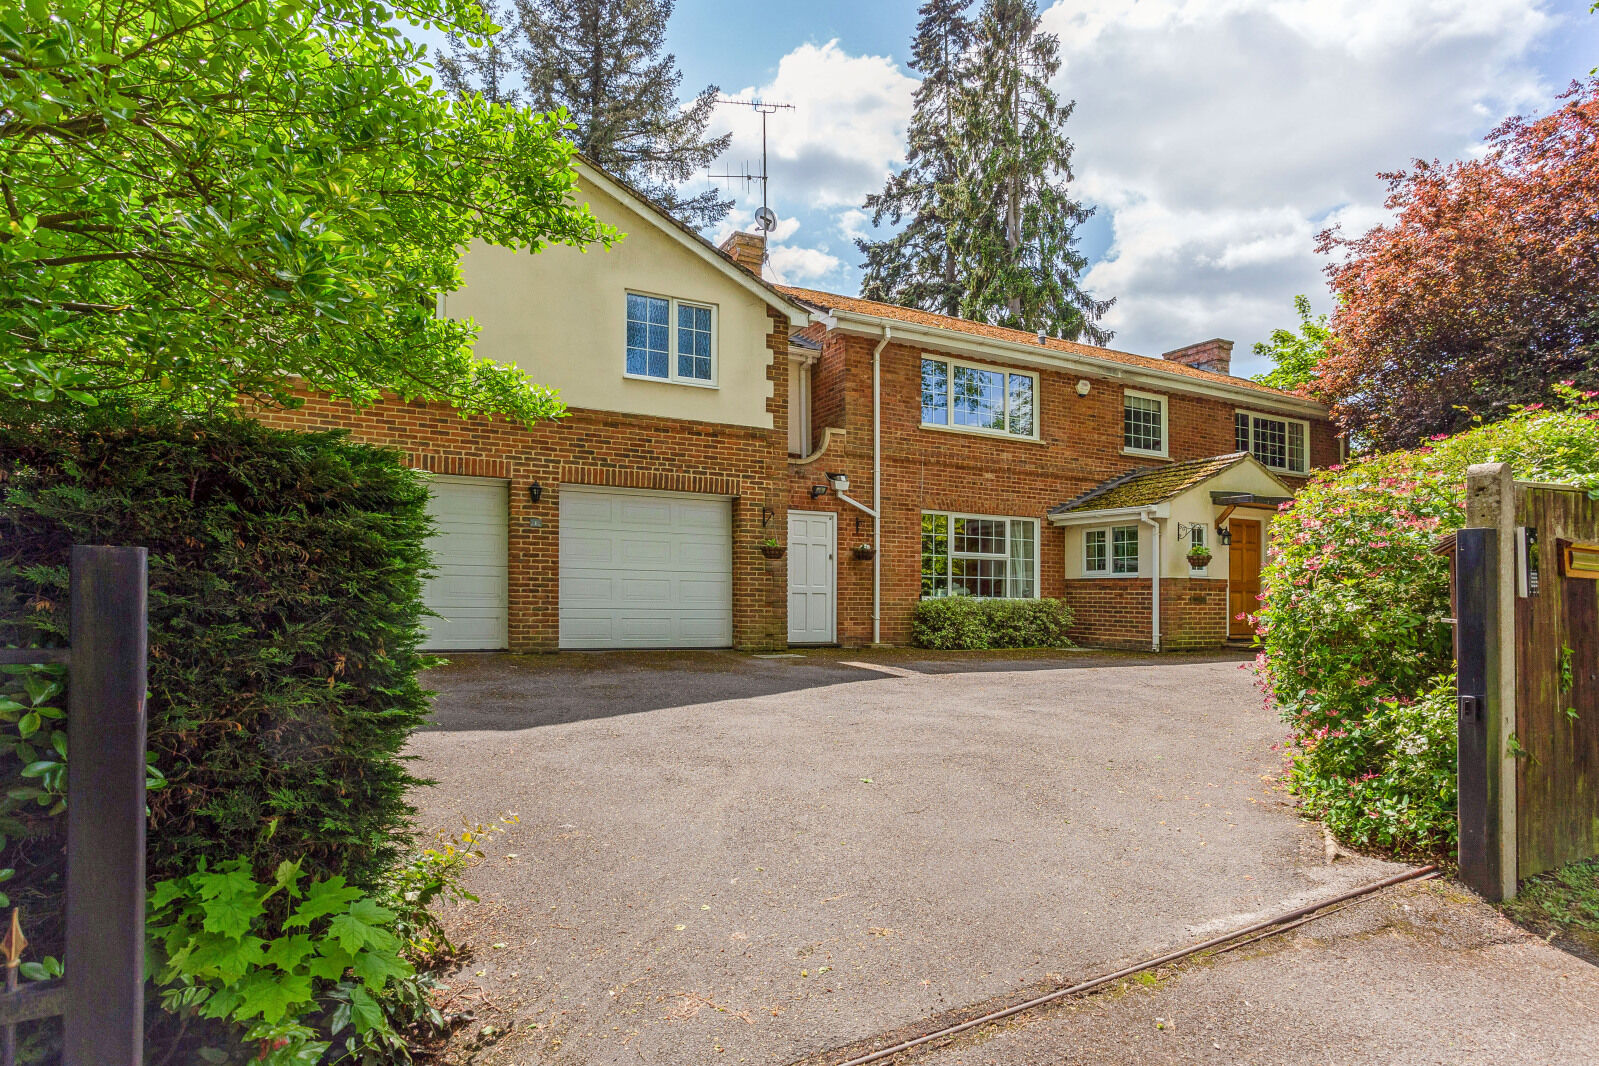 5 bedroom detached house for sale Rotherfield Road, Henley-on-Thames, RG9, main image